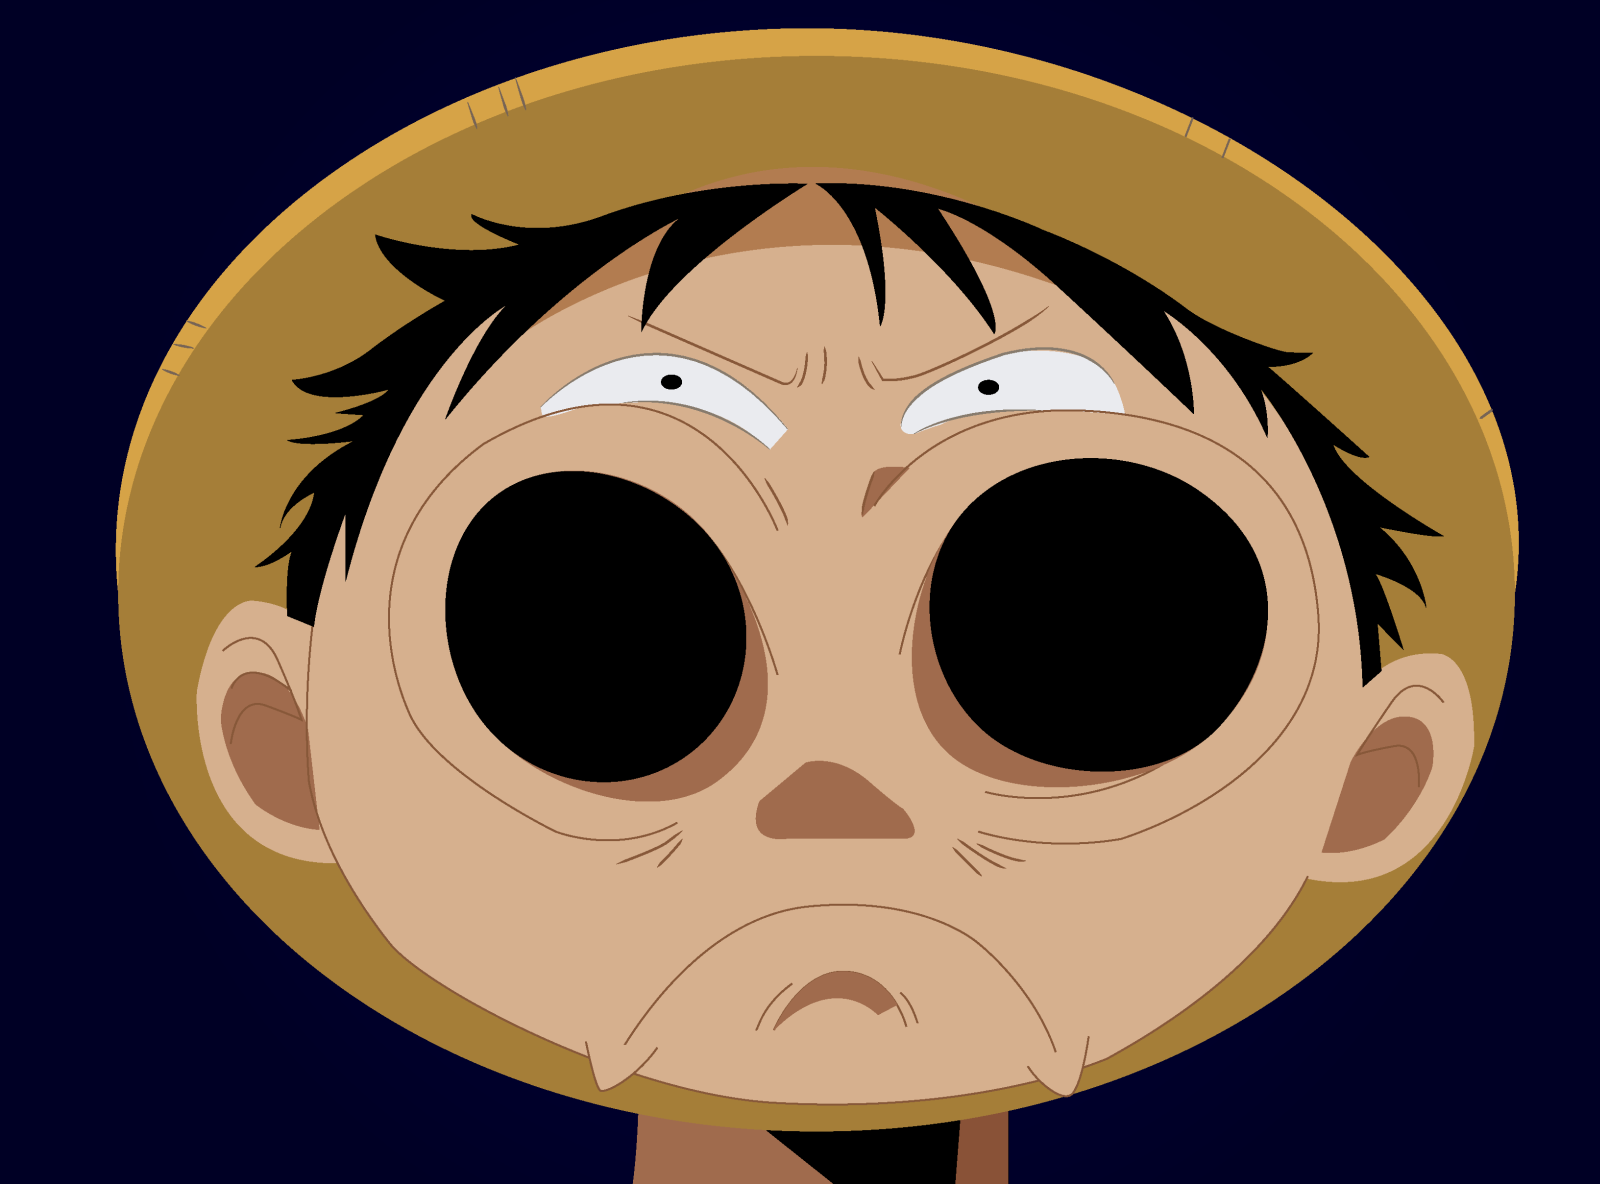 spooky face luffy by Balachander on Dribbble